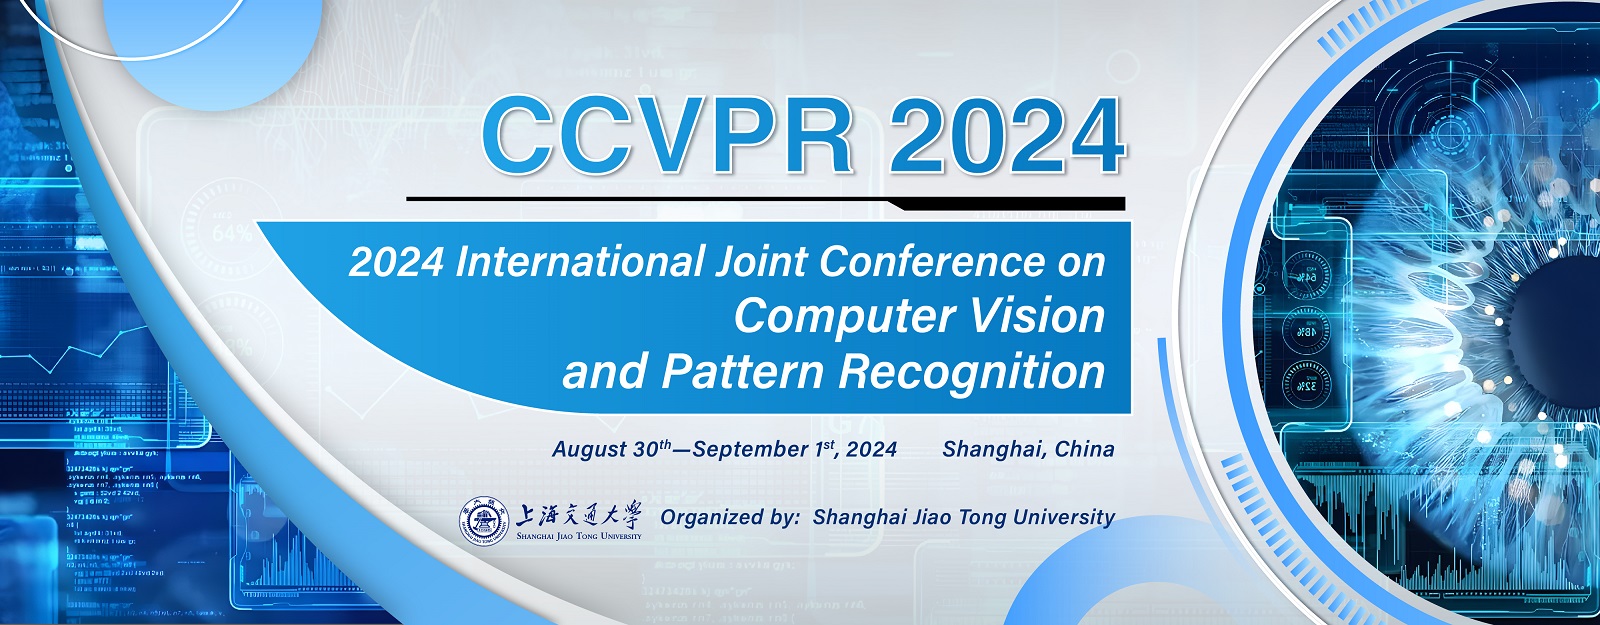 2024 International Joint Conference on Computer Vision and Pattern Recognition (CCVPR 2024), Shanghai, China,Shanghai,China